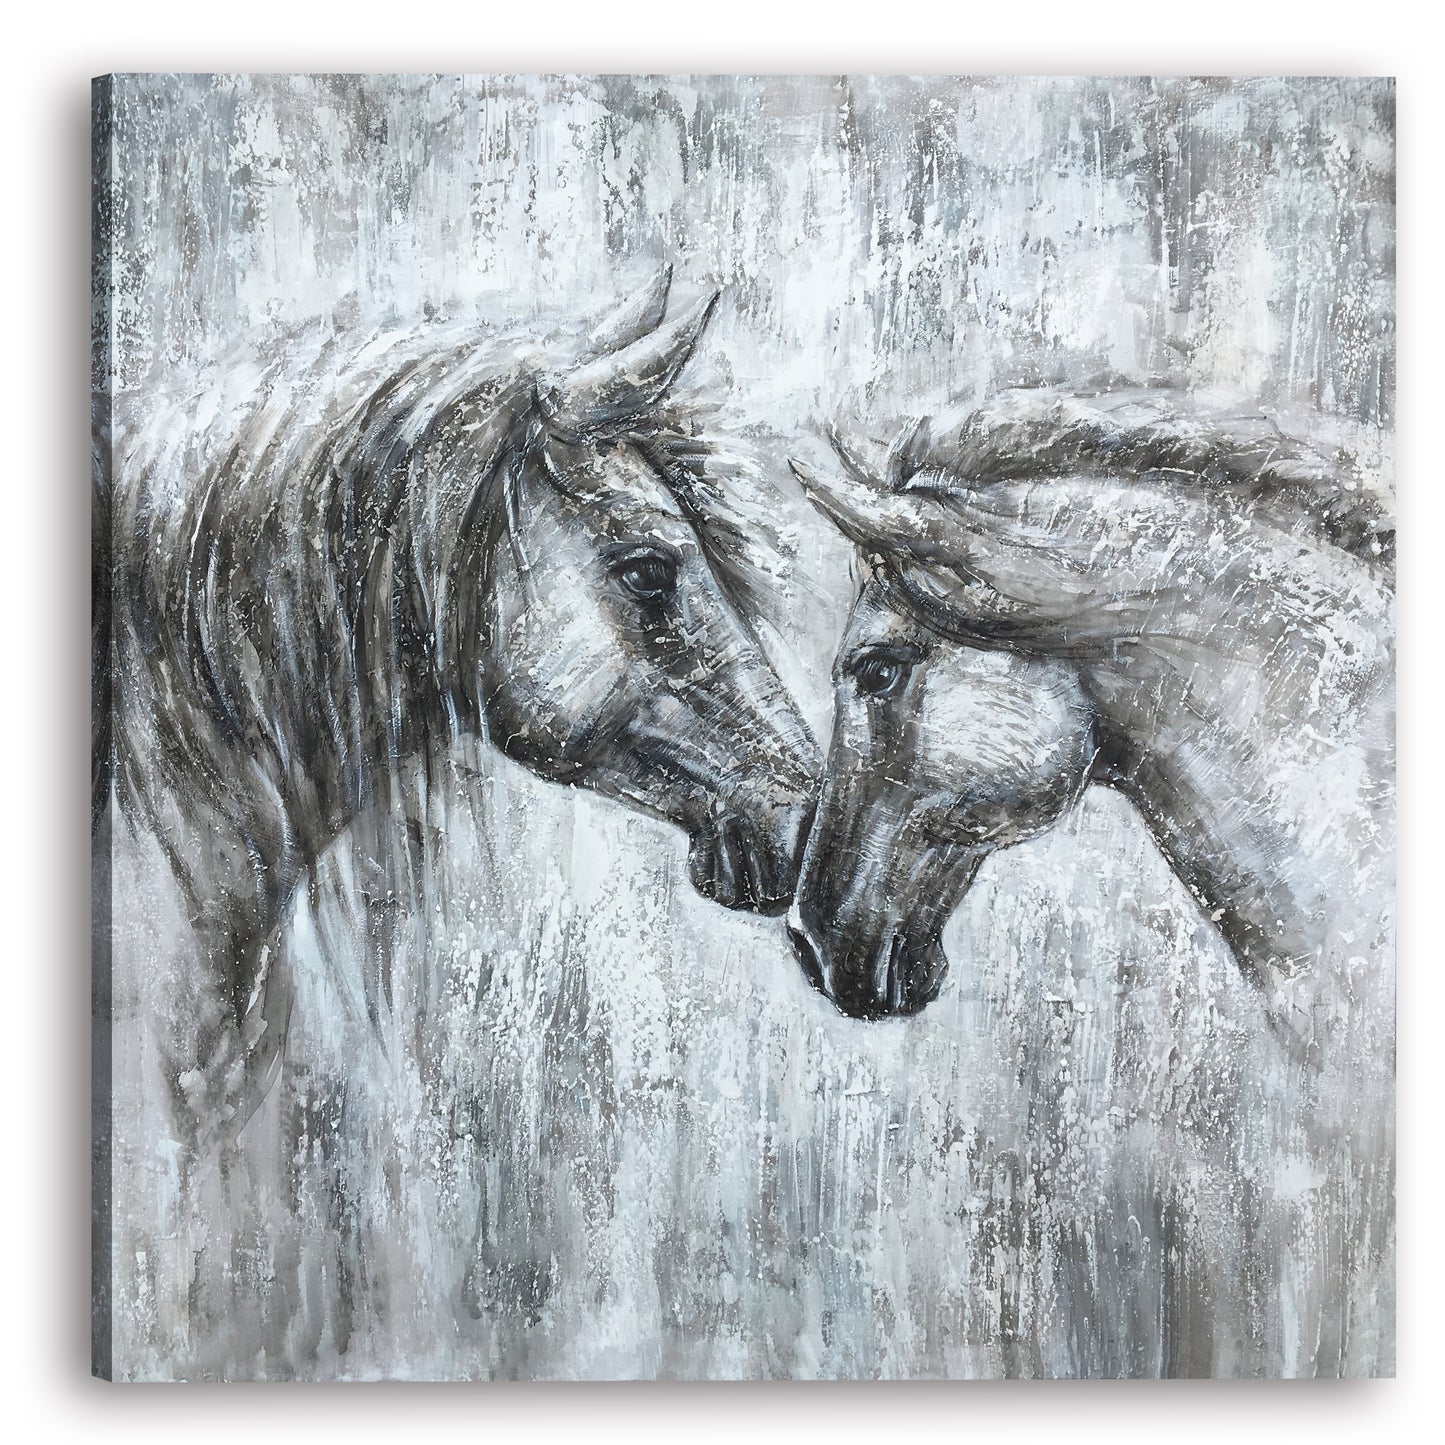 Horse art "Love and Faith" hand-painted on Wrapped Canvas